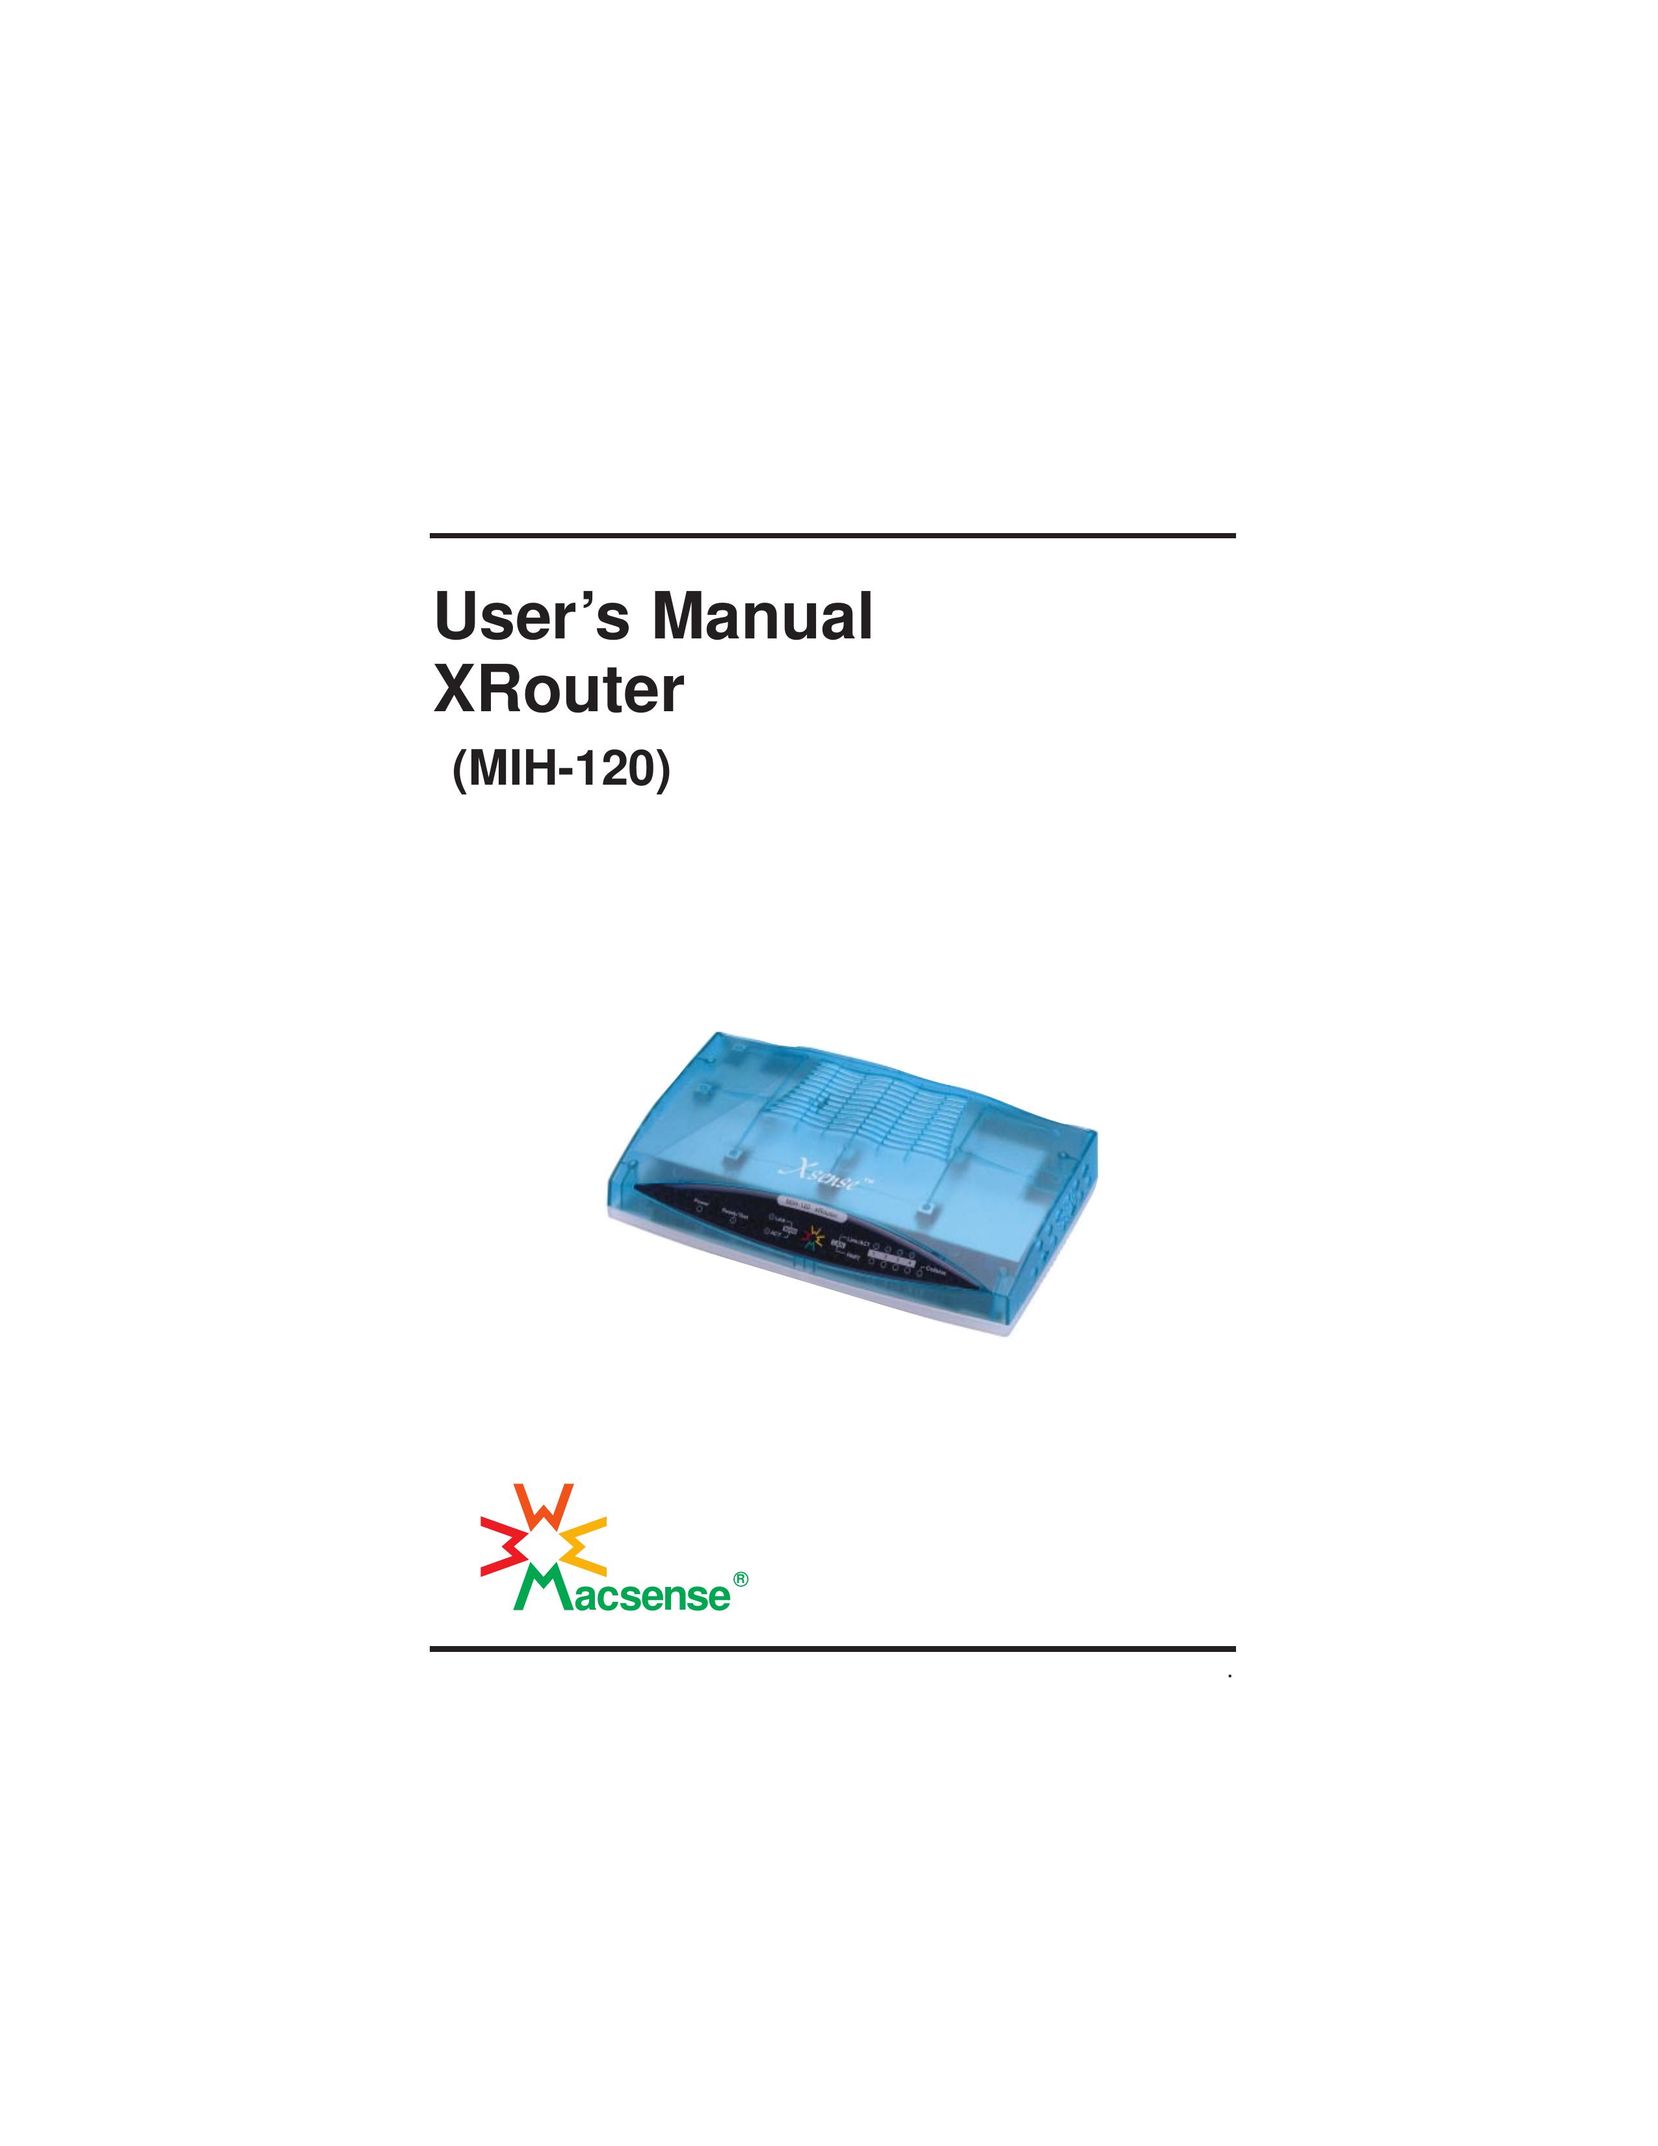 Macsense Connectivity MIH-120 Network Router User Manual